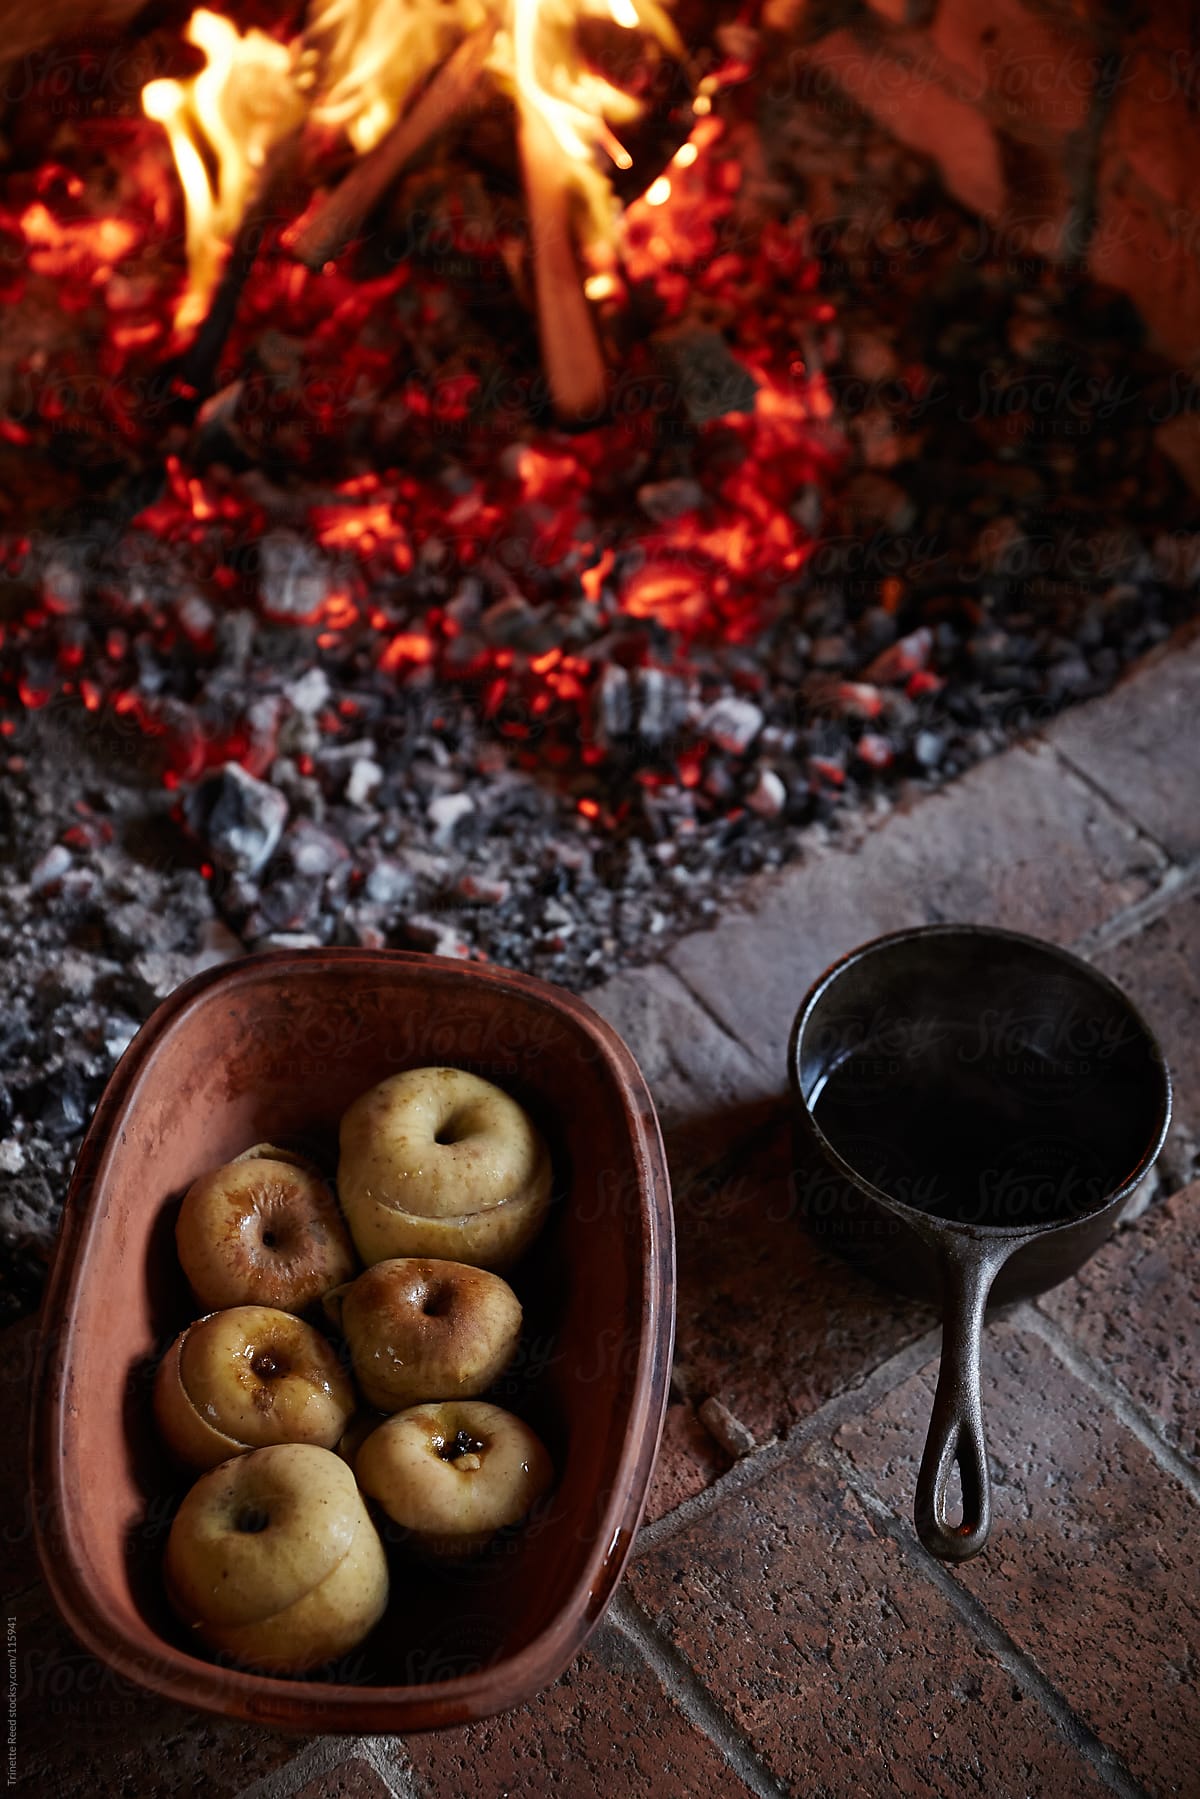 Baked apples in ceramic bowl cooked over the fire